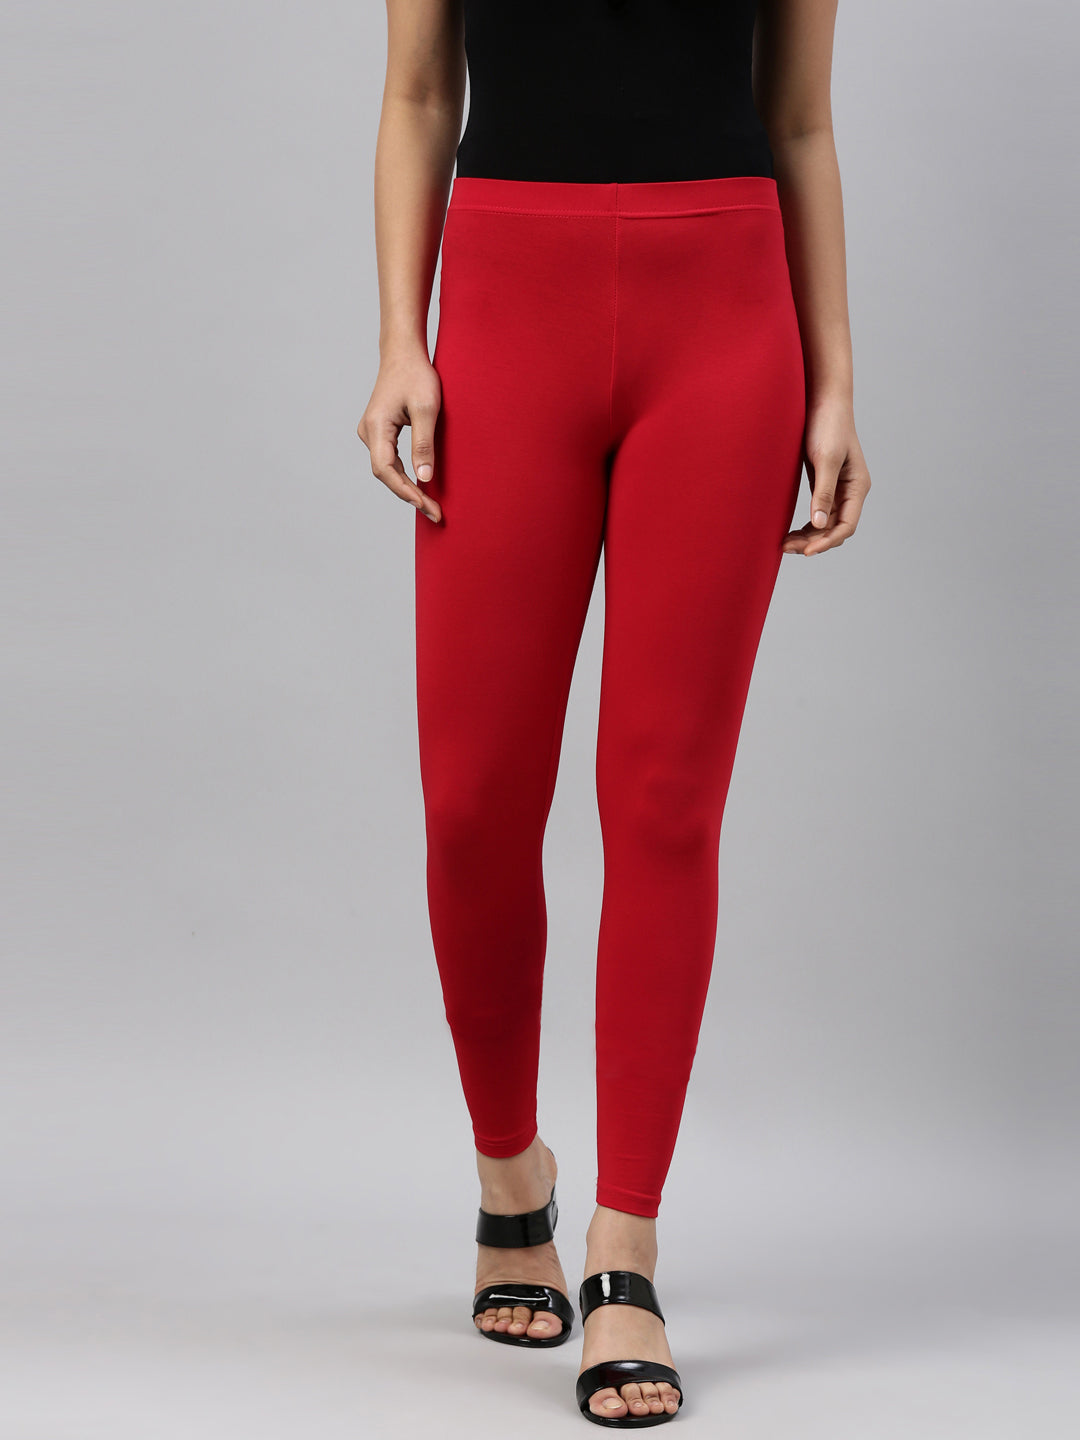 Buy PINKSHELL Women?s Straight Fit Designer Patch Ankle Length Legging  Elegant Solid Cotton Lycra Super Quality,Front Patch on Ankle with, Fancy  Legging Pink Shell (Large, HOT Pink) Online In India At Discounted